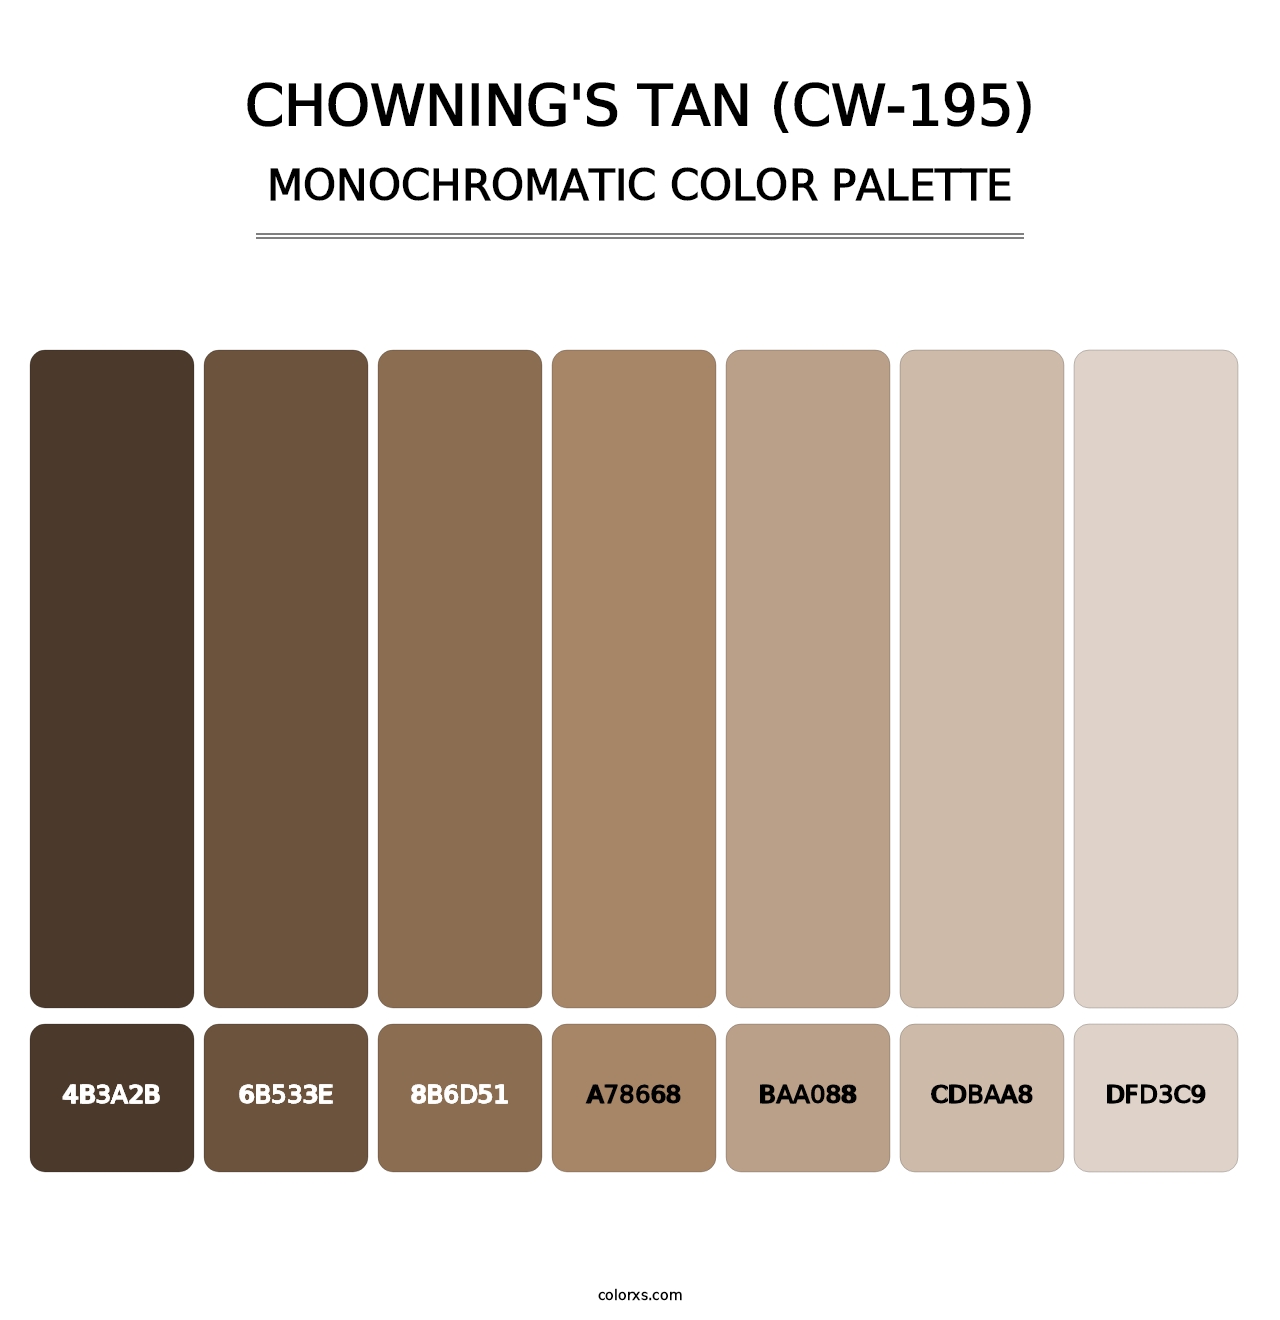 Chowning's Tan (CW-195) - Monochromatic Color Palette